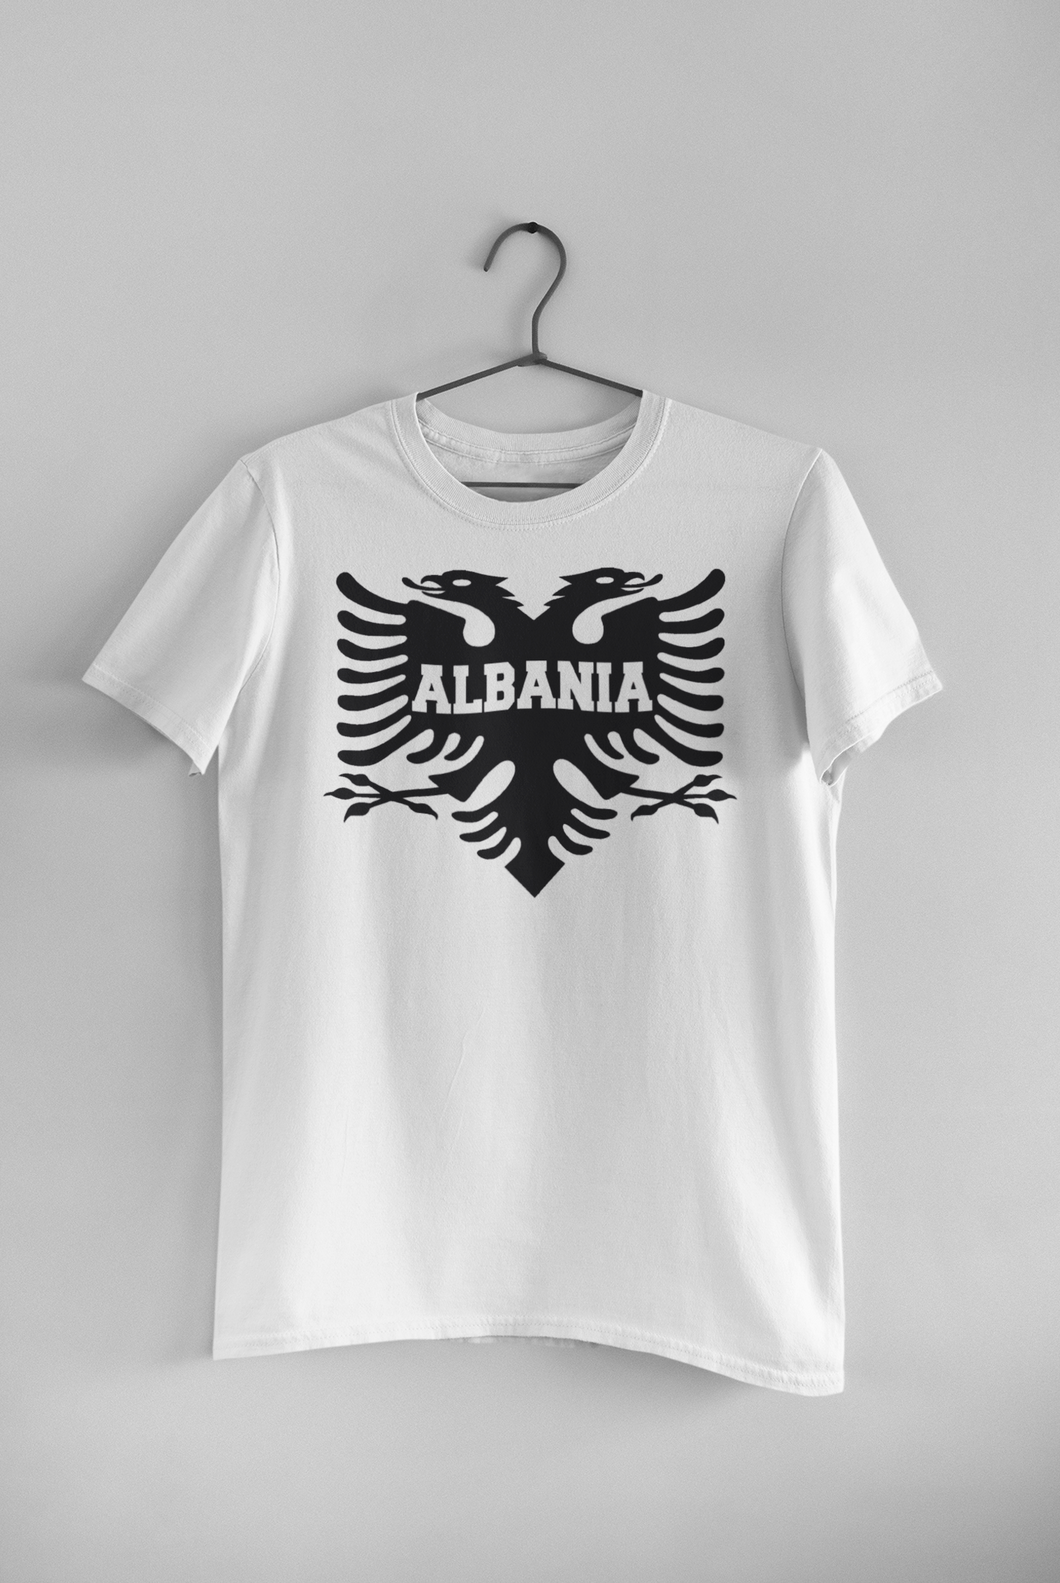 Albanian eagle with Albania text on the middle (Man T-Shirt)